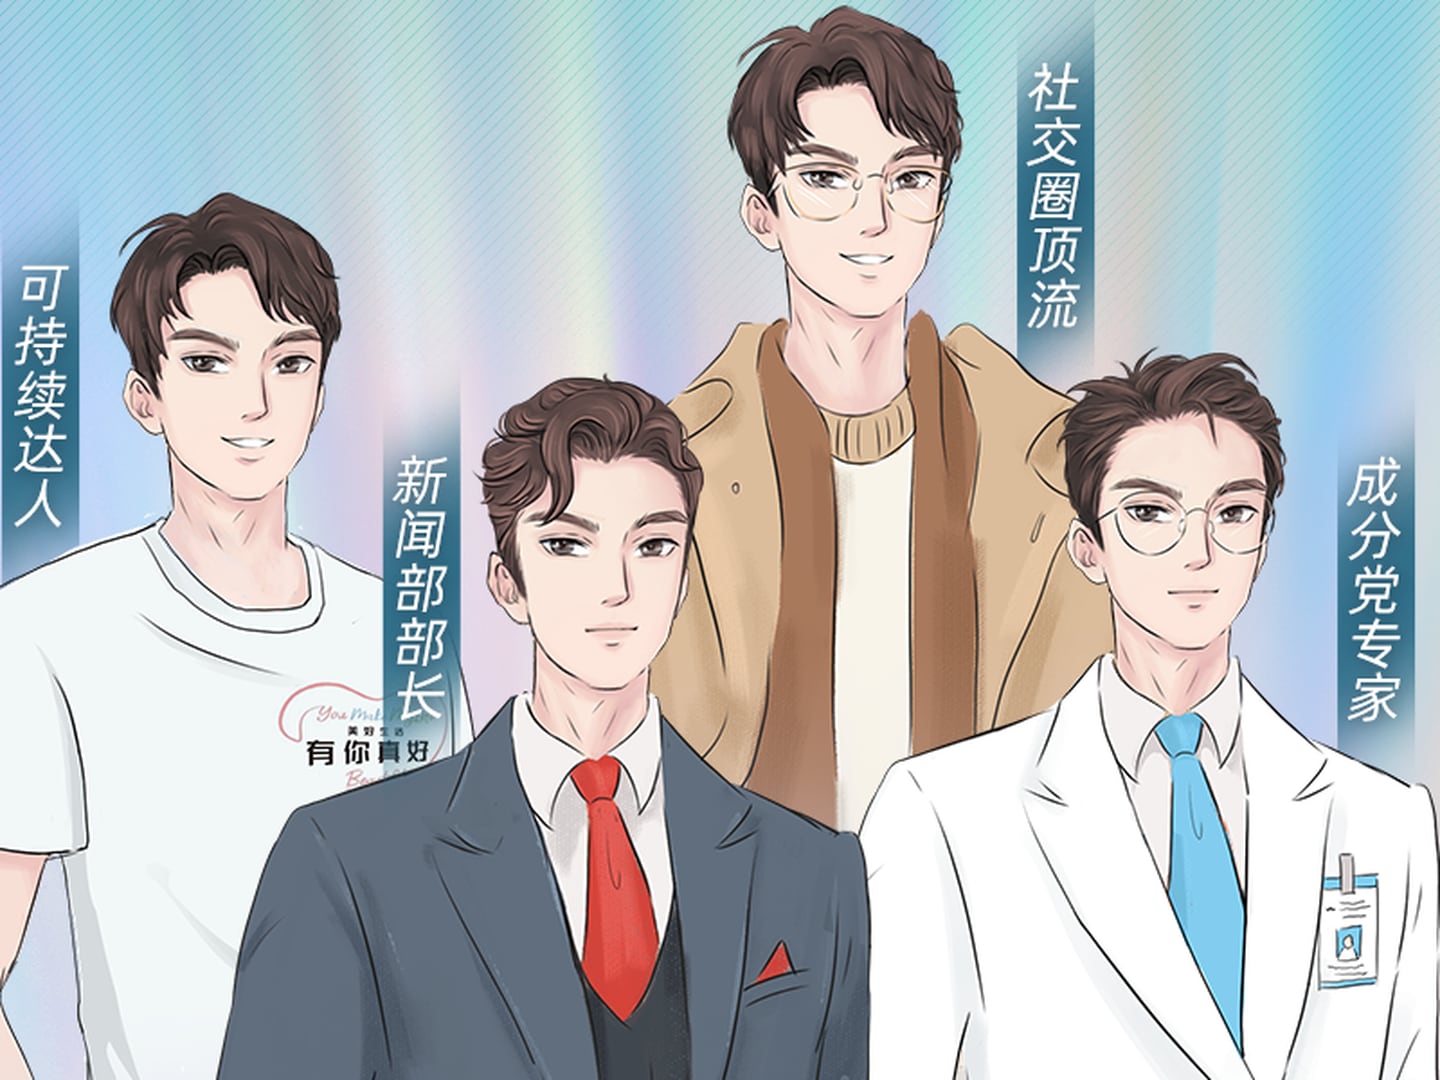 L’Oréal's Mr Ou, a virtual idol introduced in China this week. L’Oréal